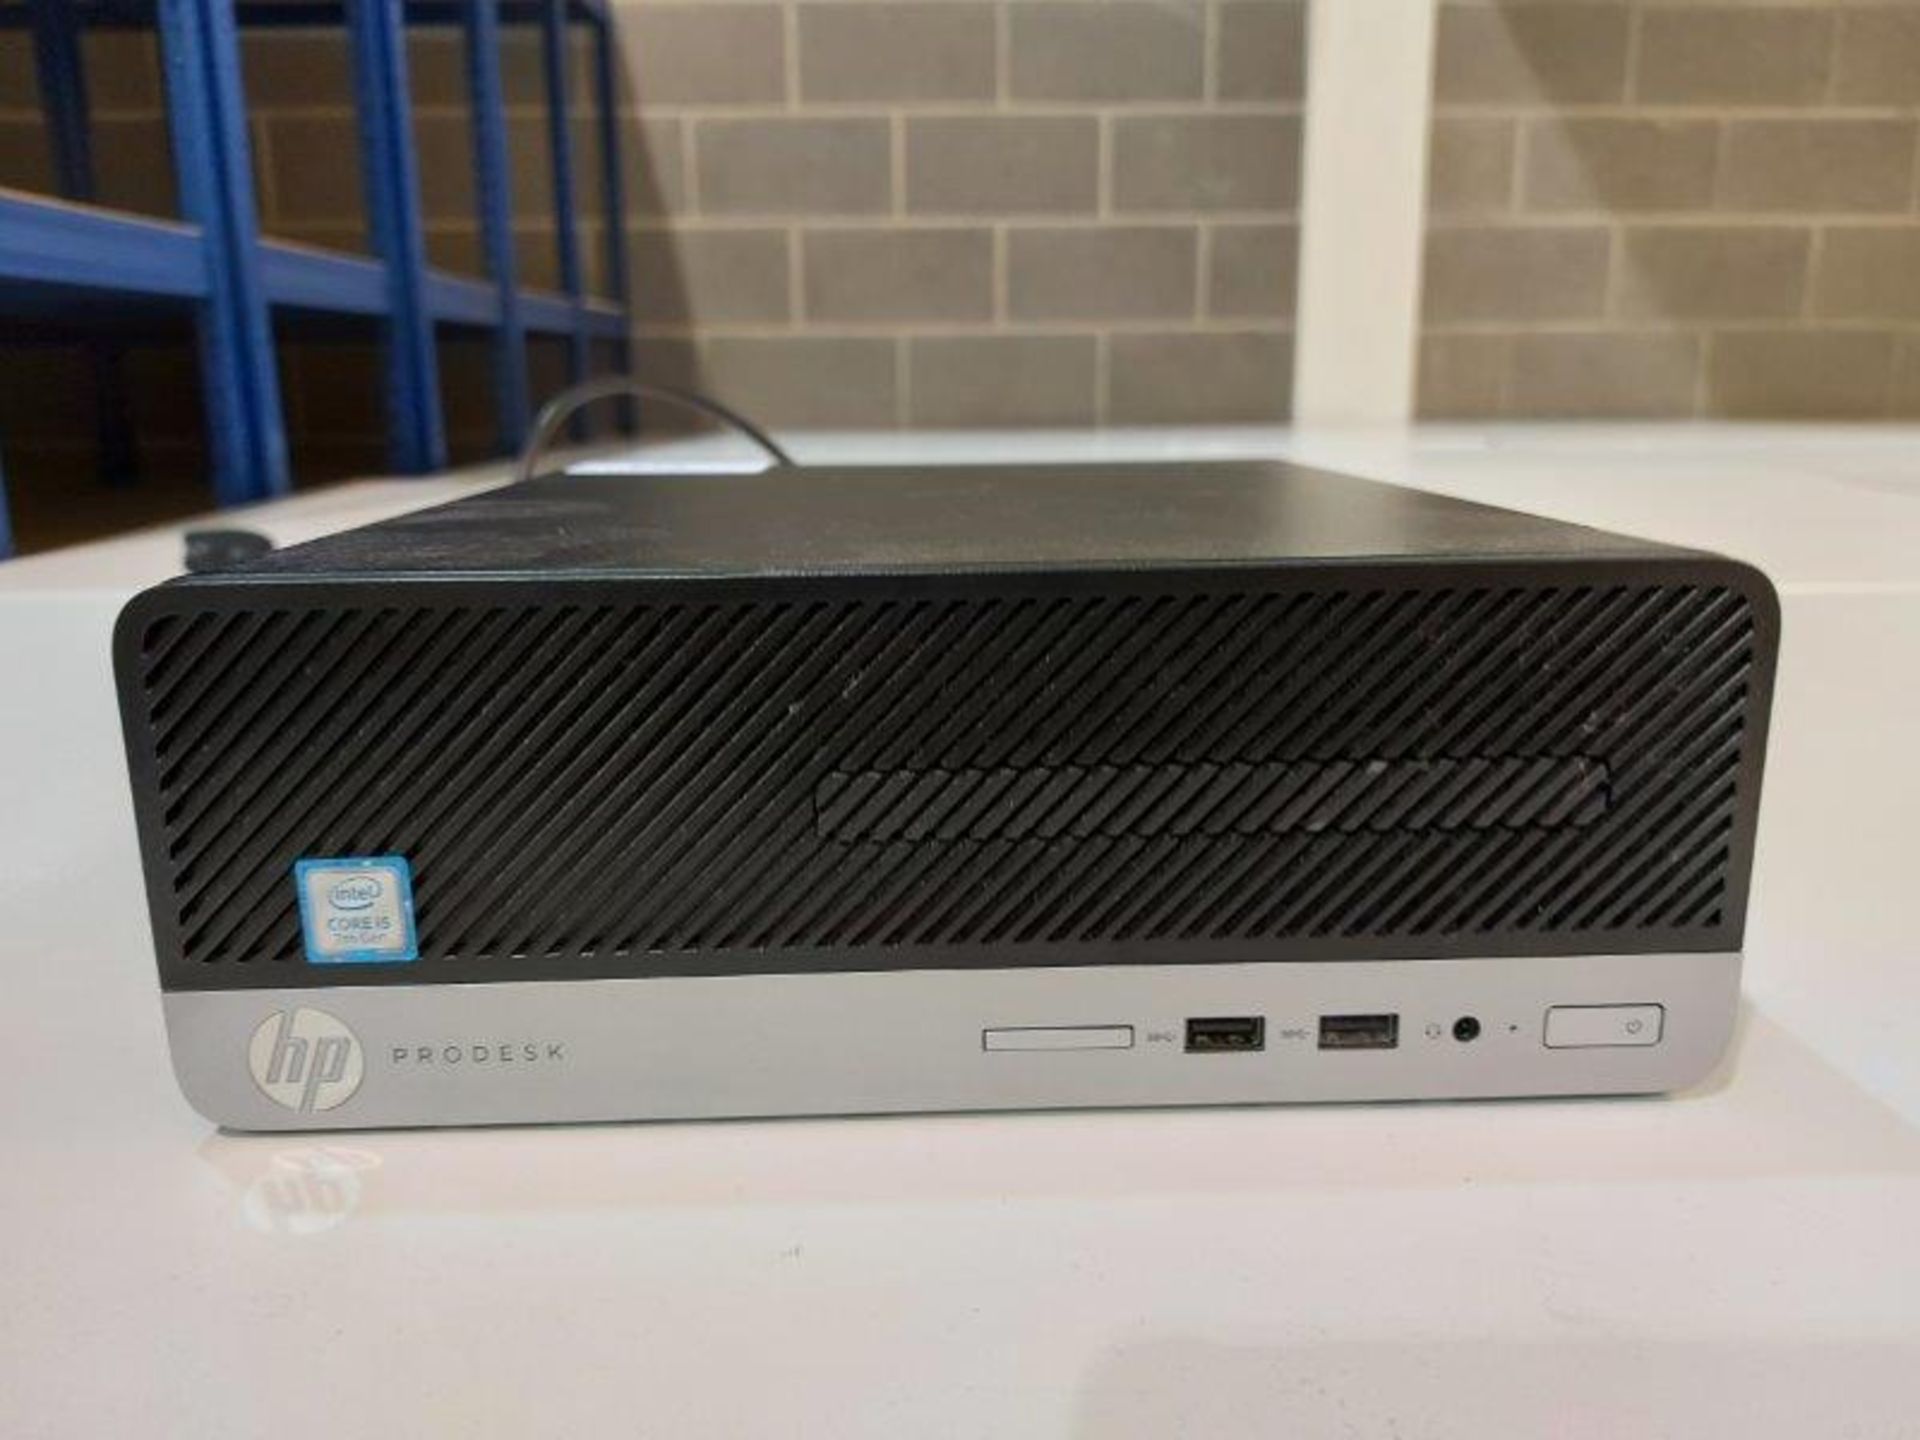 HP Prodesk 400 G4 SFF core i5 7th Gen personal computer - Image 2 of 3